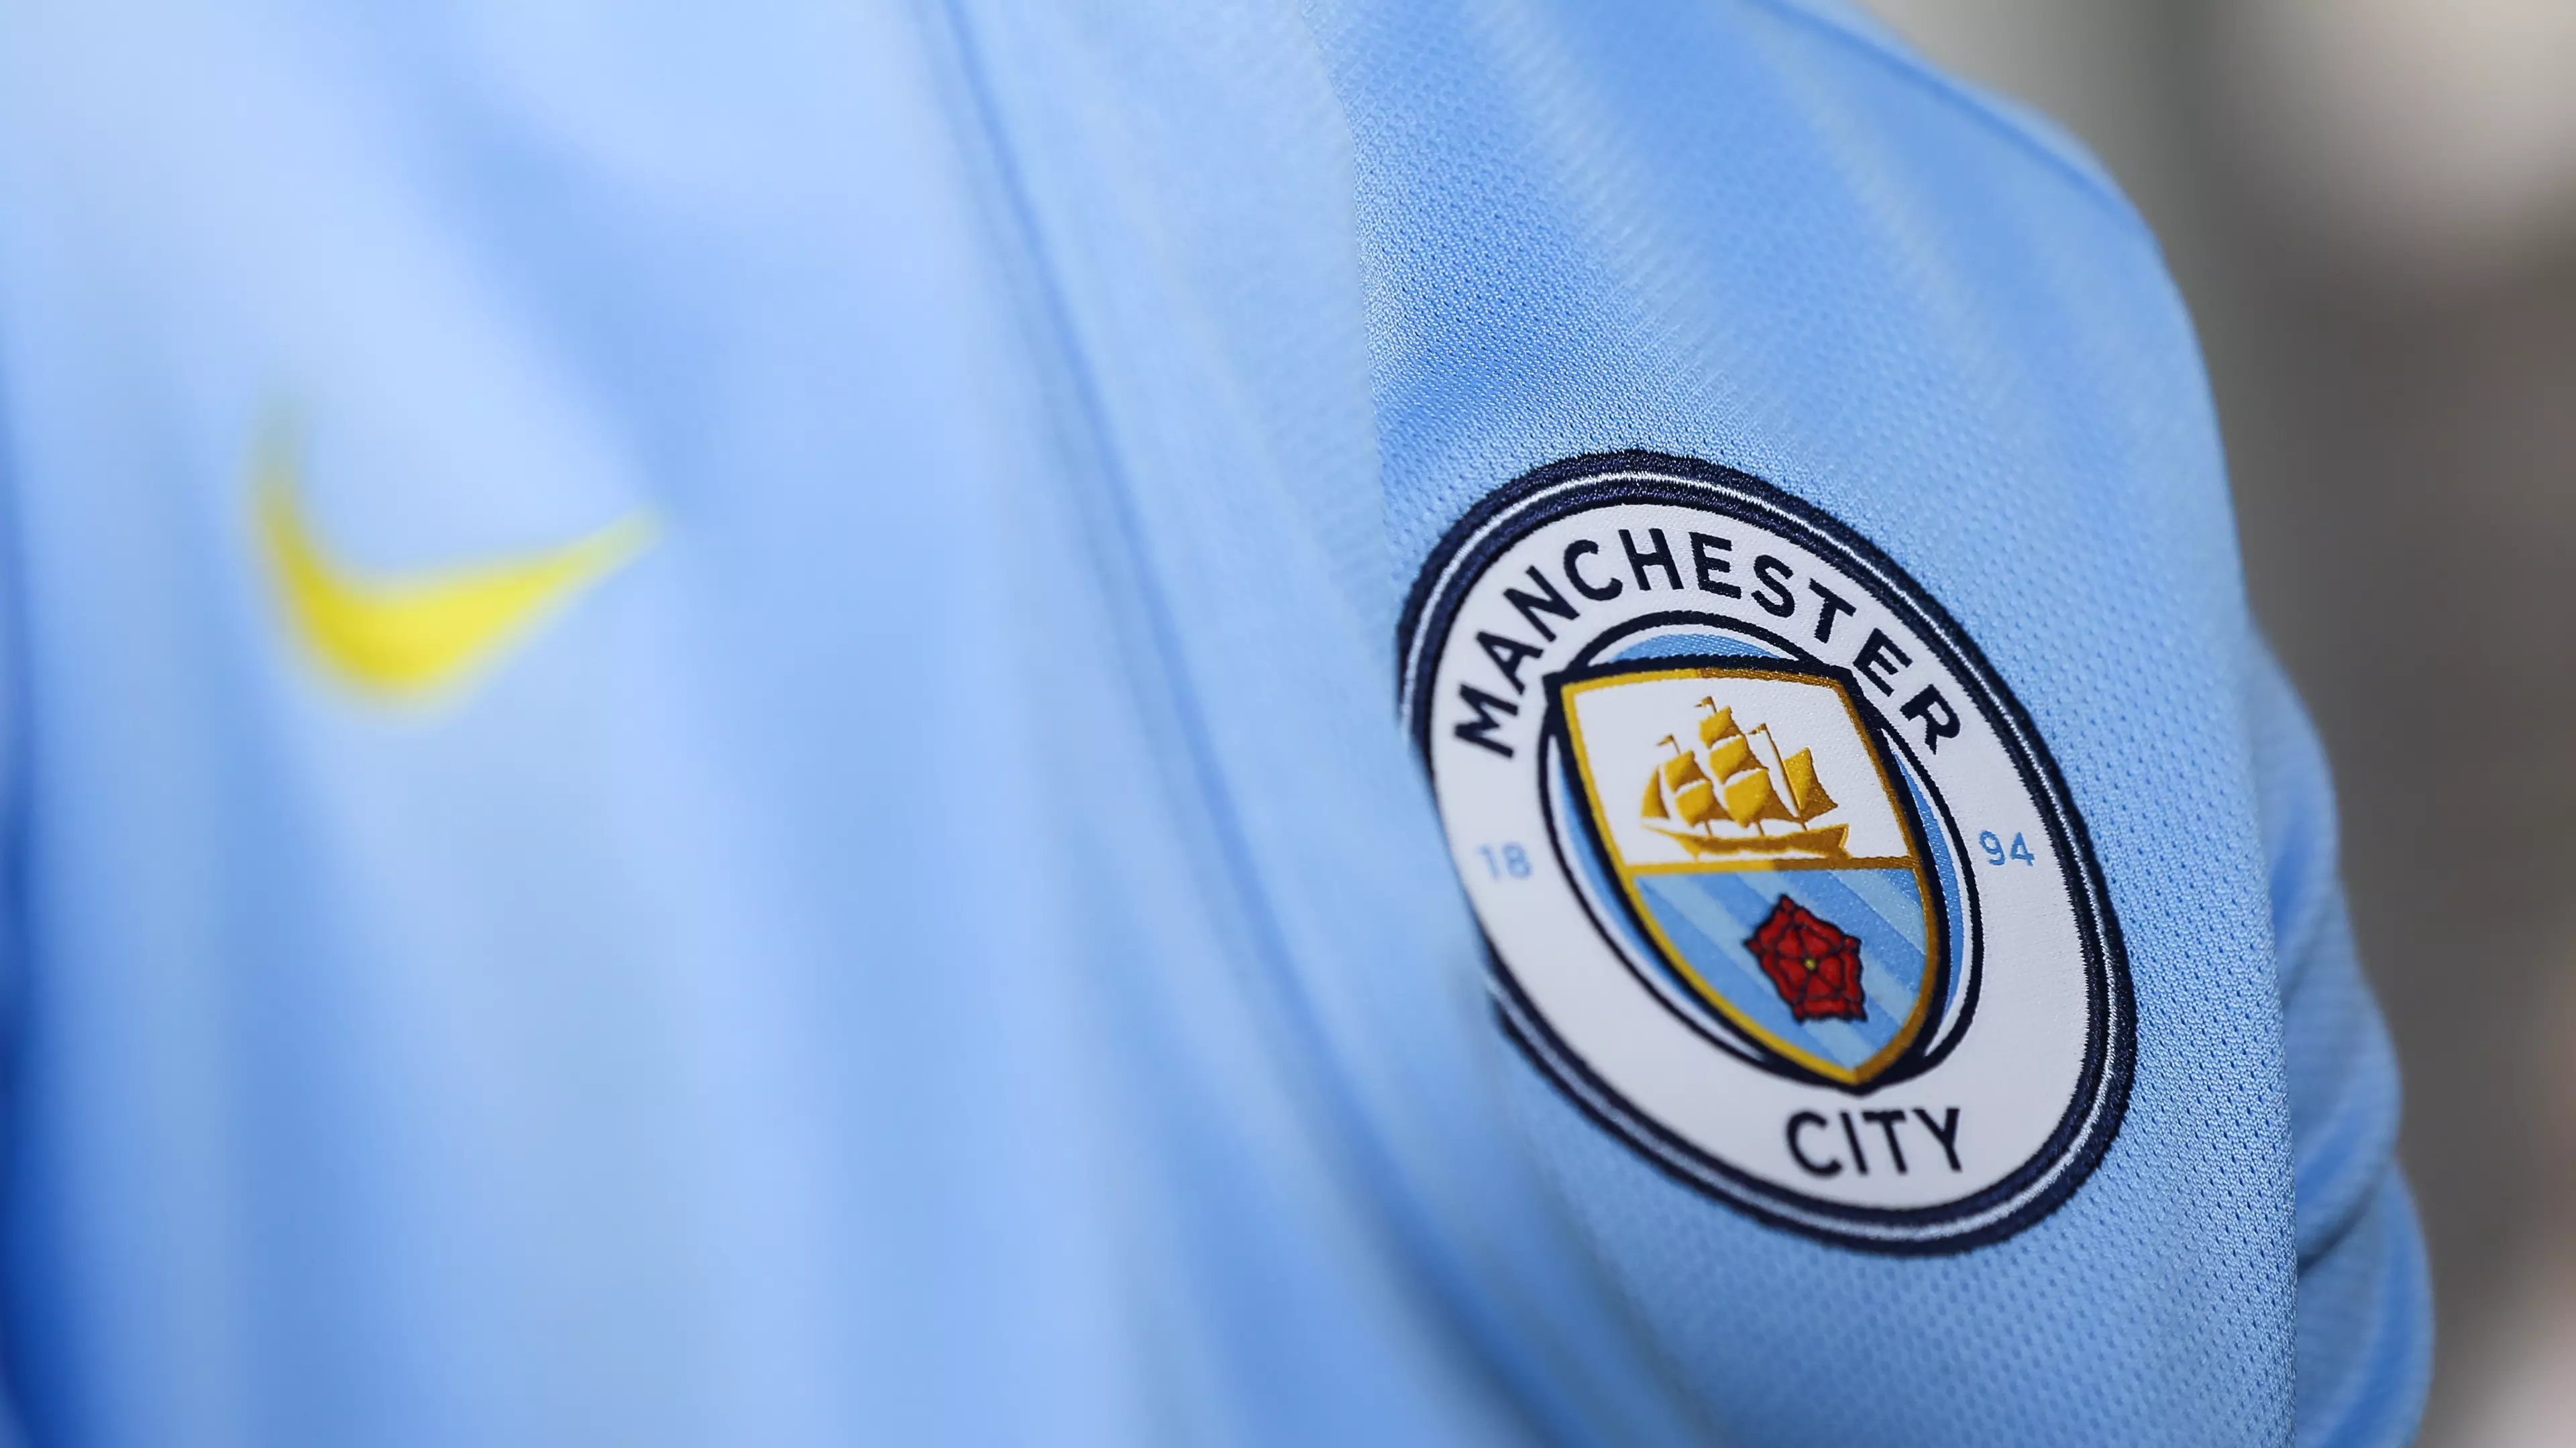 Manchester City's 2017/18 Away Kit Leaked Online And It's Pretty Smart